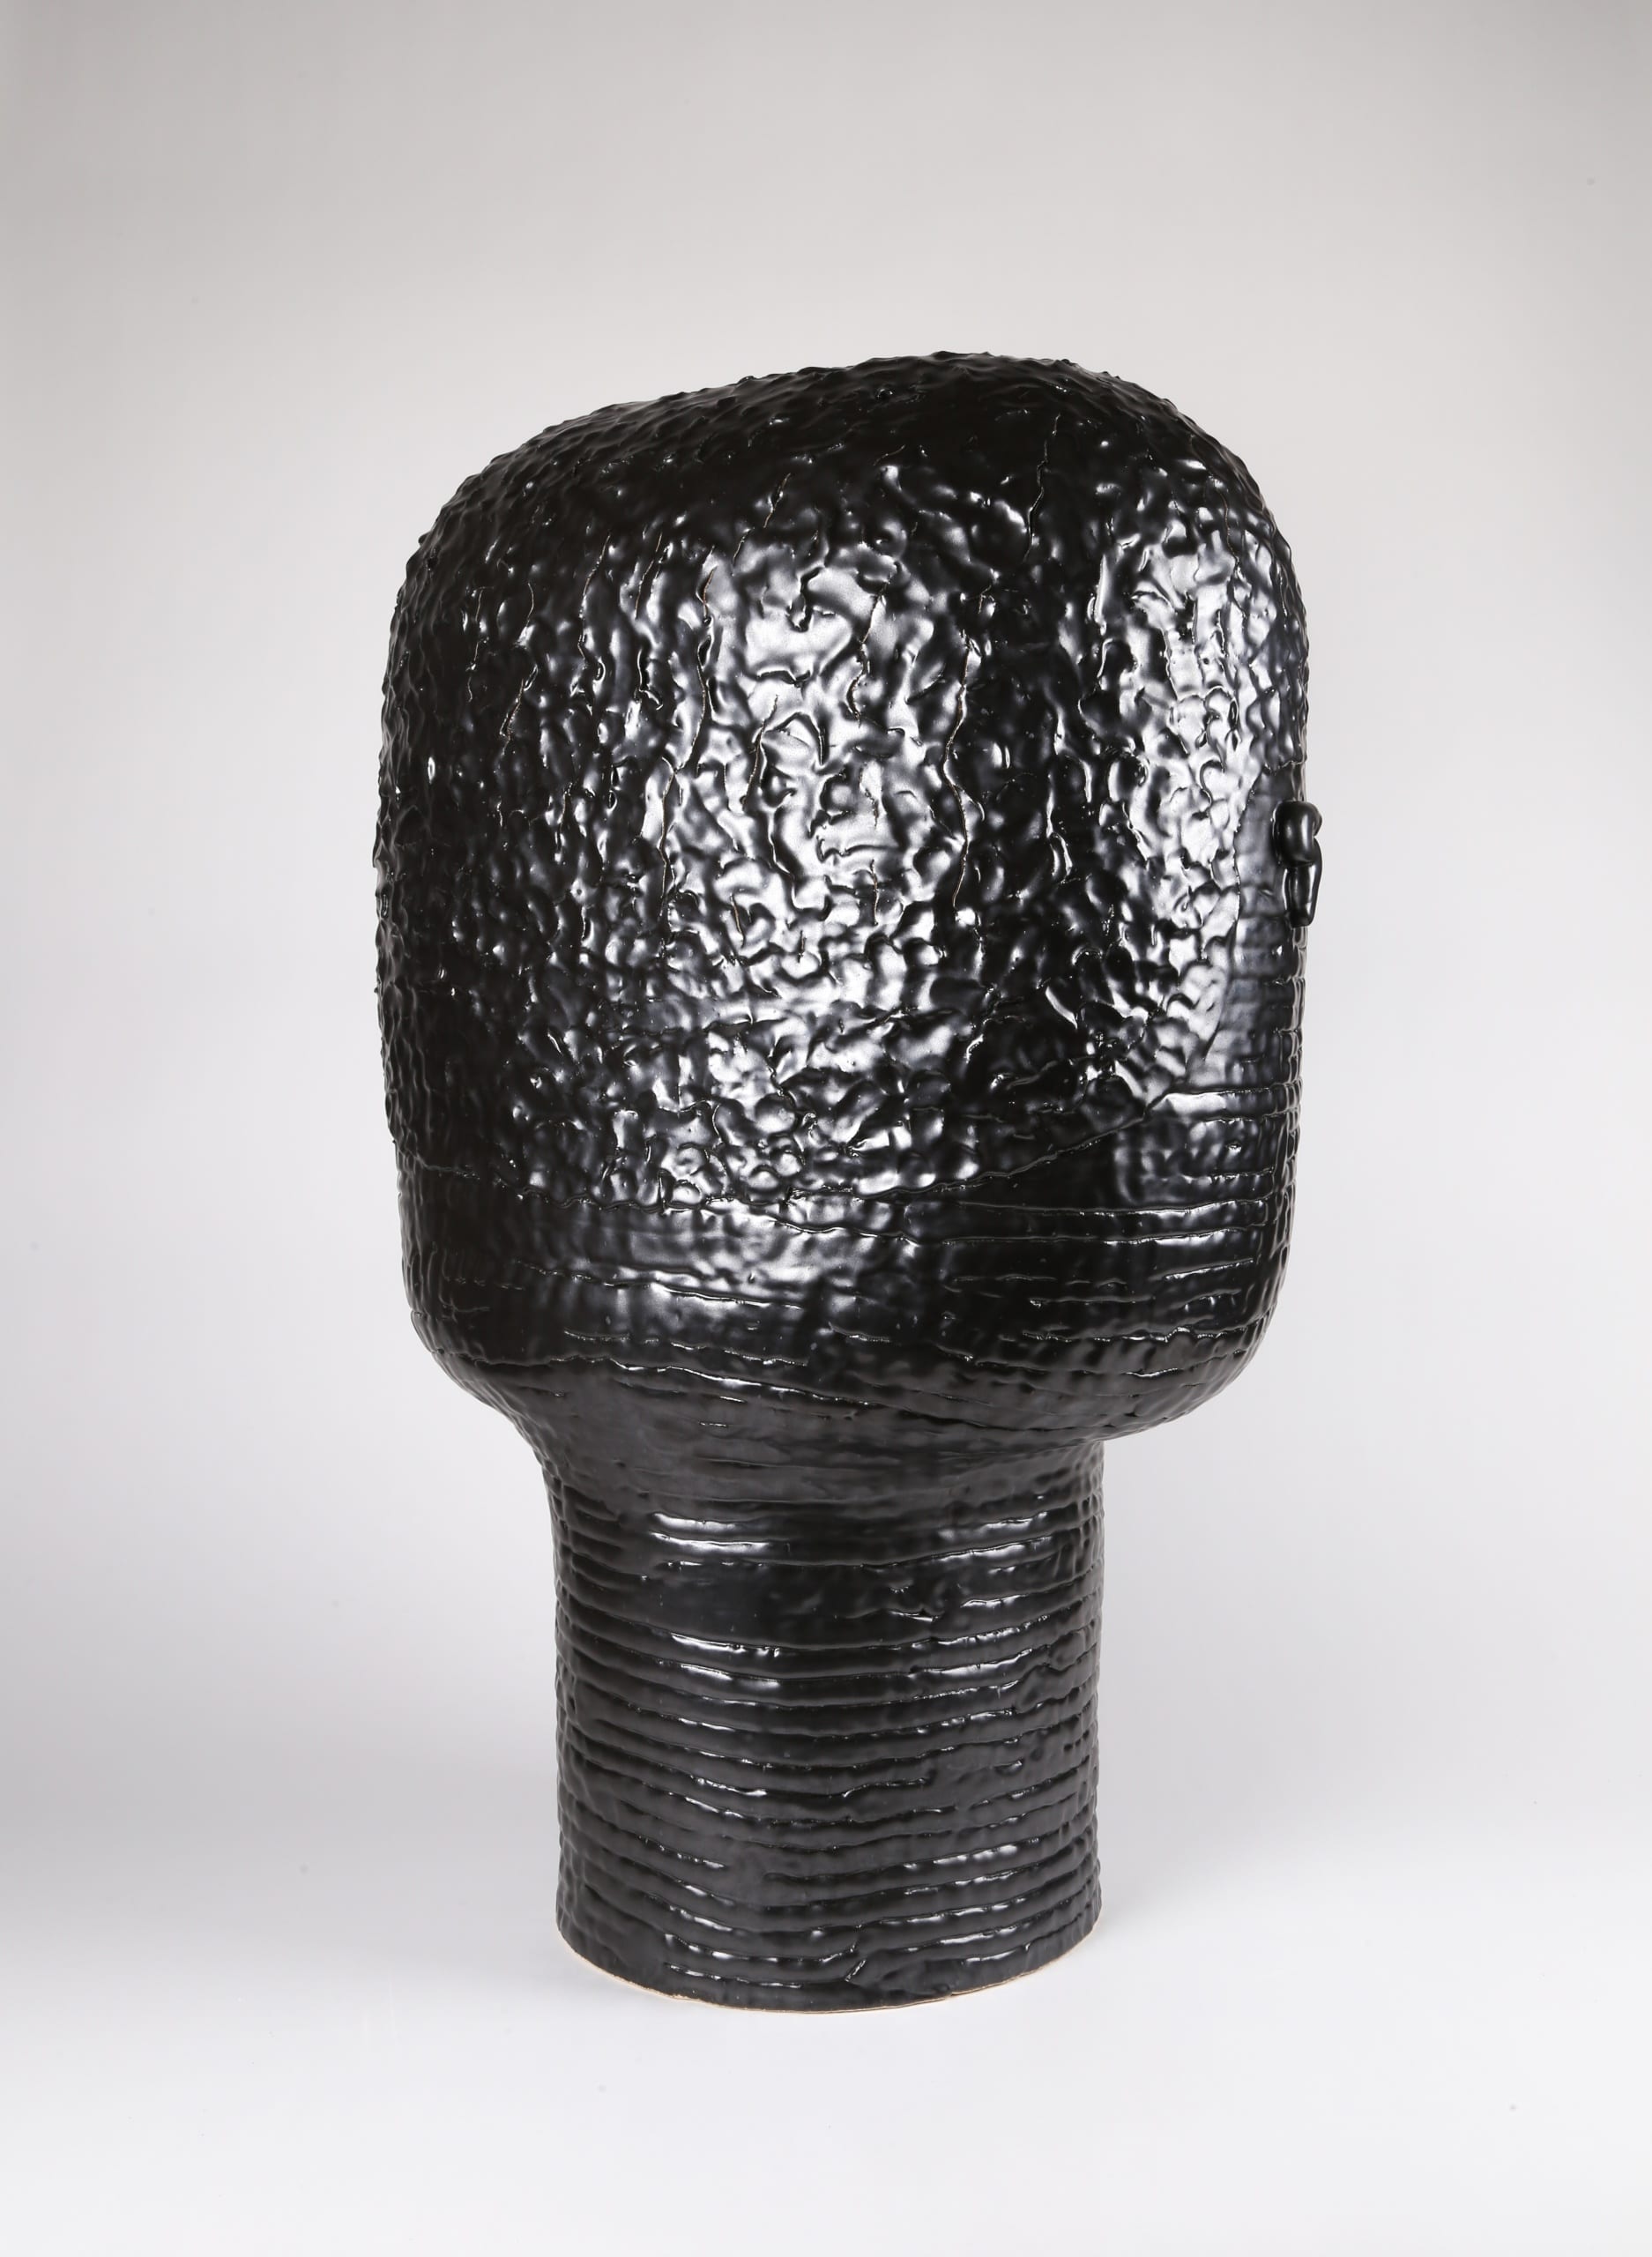 Color photograph with a back view of an abstract ceramic portrait head that appears to be made from a long coil of clay. The head is sculpted to appear square or block-like. The photo shows the rear of the portrait, detailing the texture of the figure's short cropped hair. The object is monochromatic (black), with a slight sheen to the glaze.